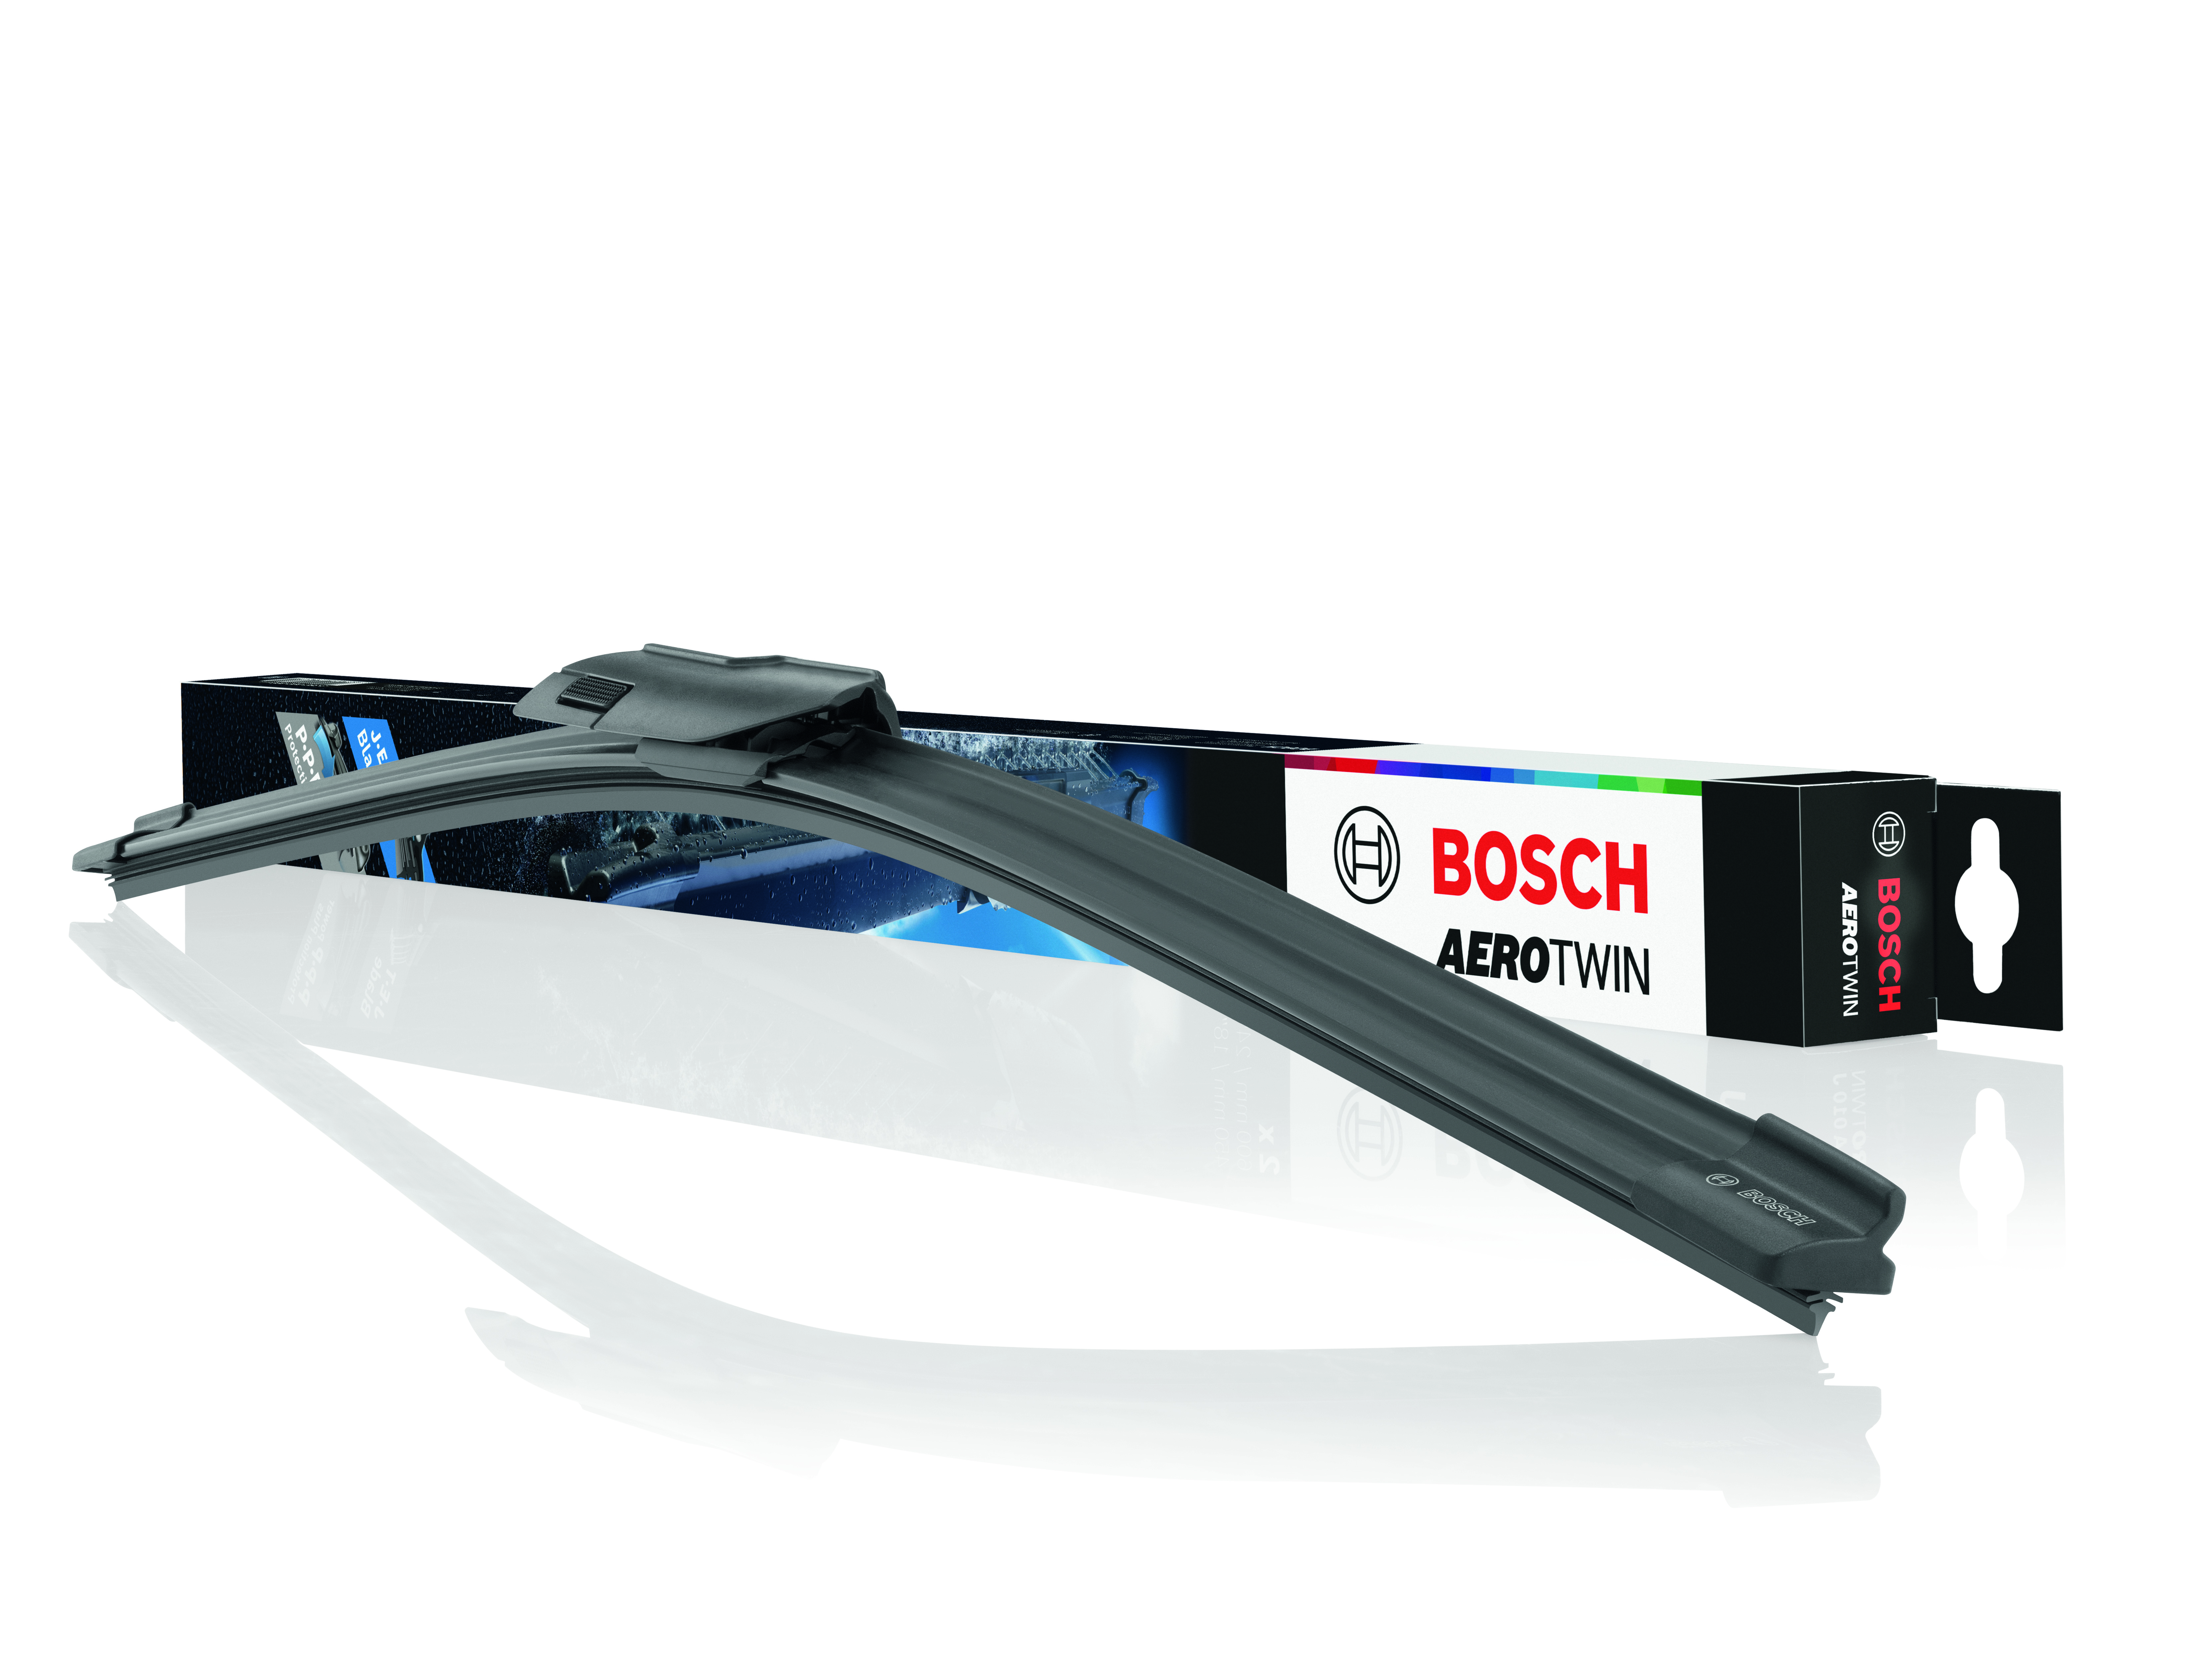 New Bosch Aerotwin J.E.T Blade with spray nozzles integrated in